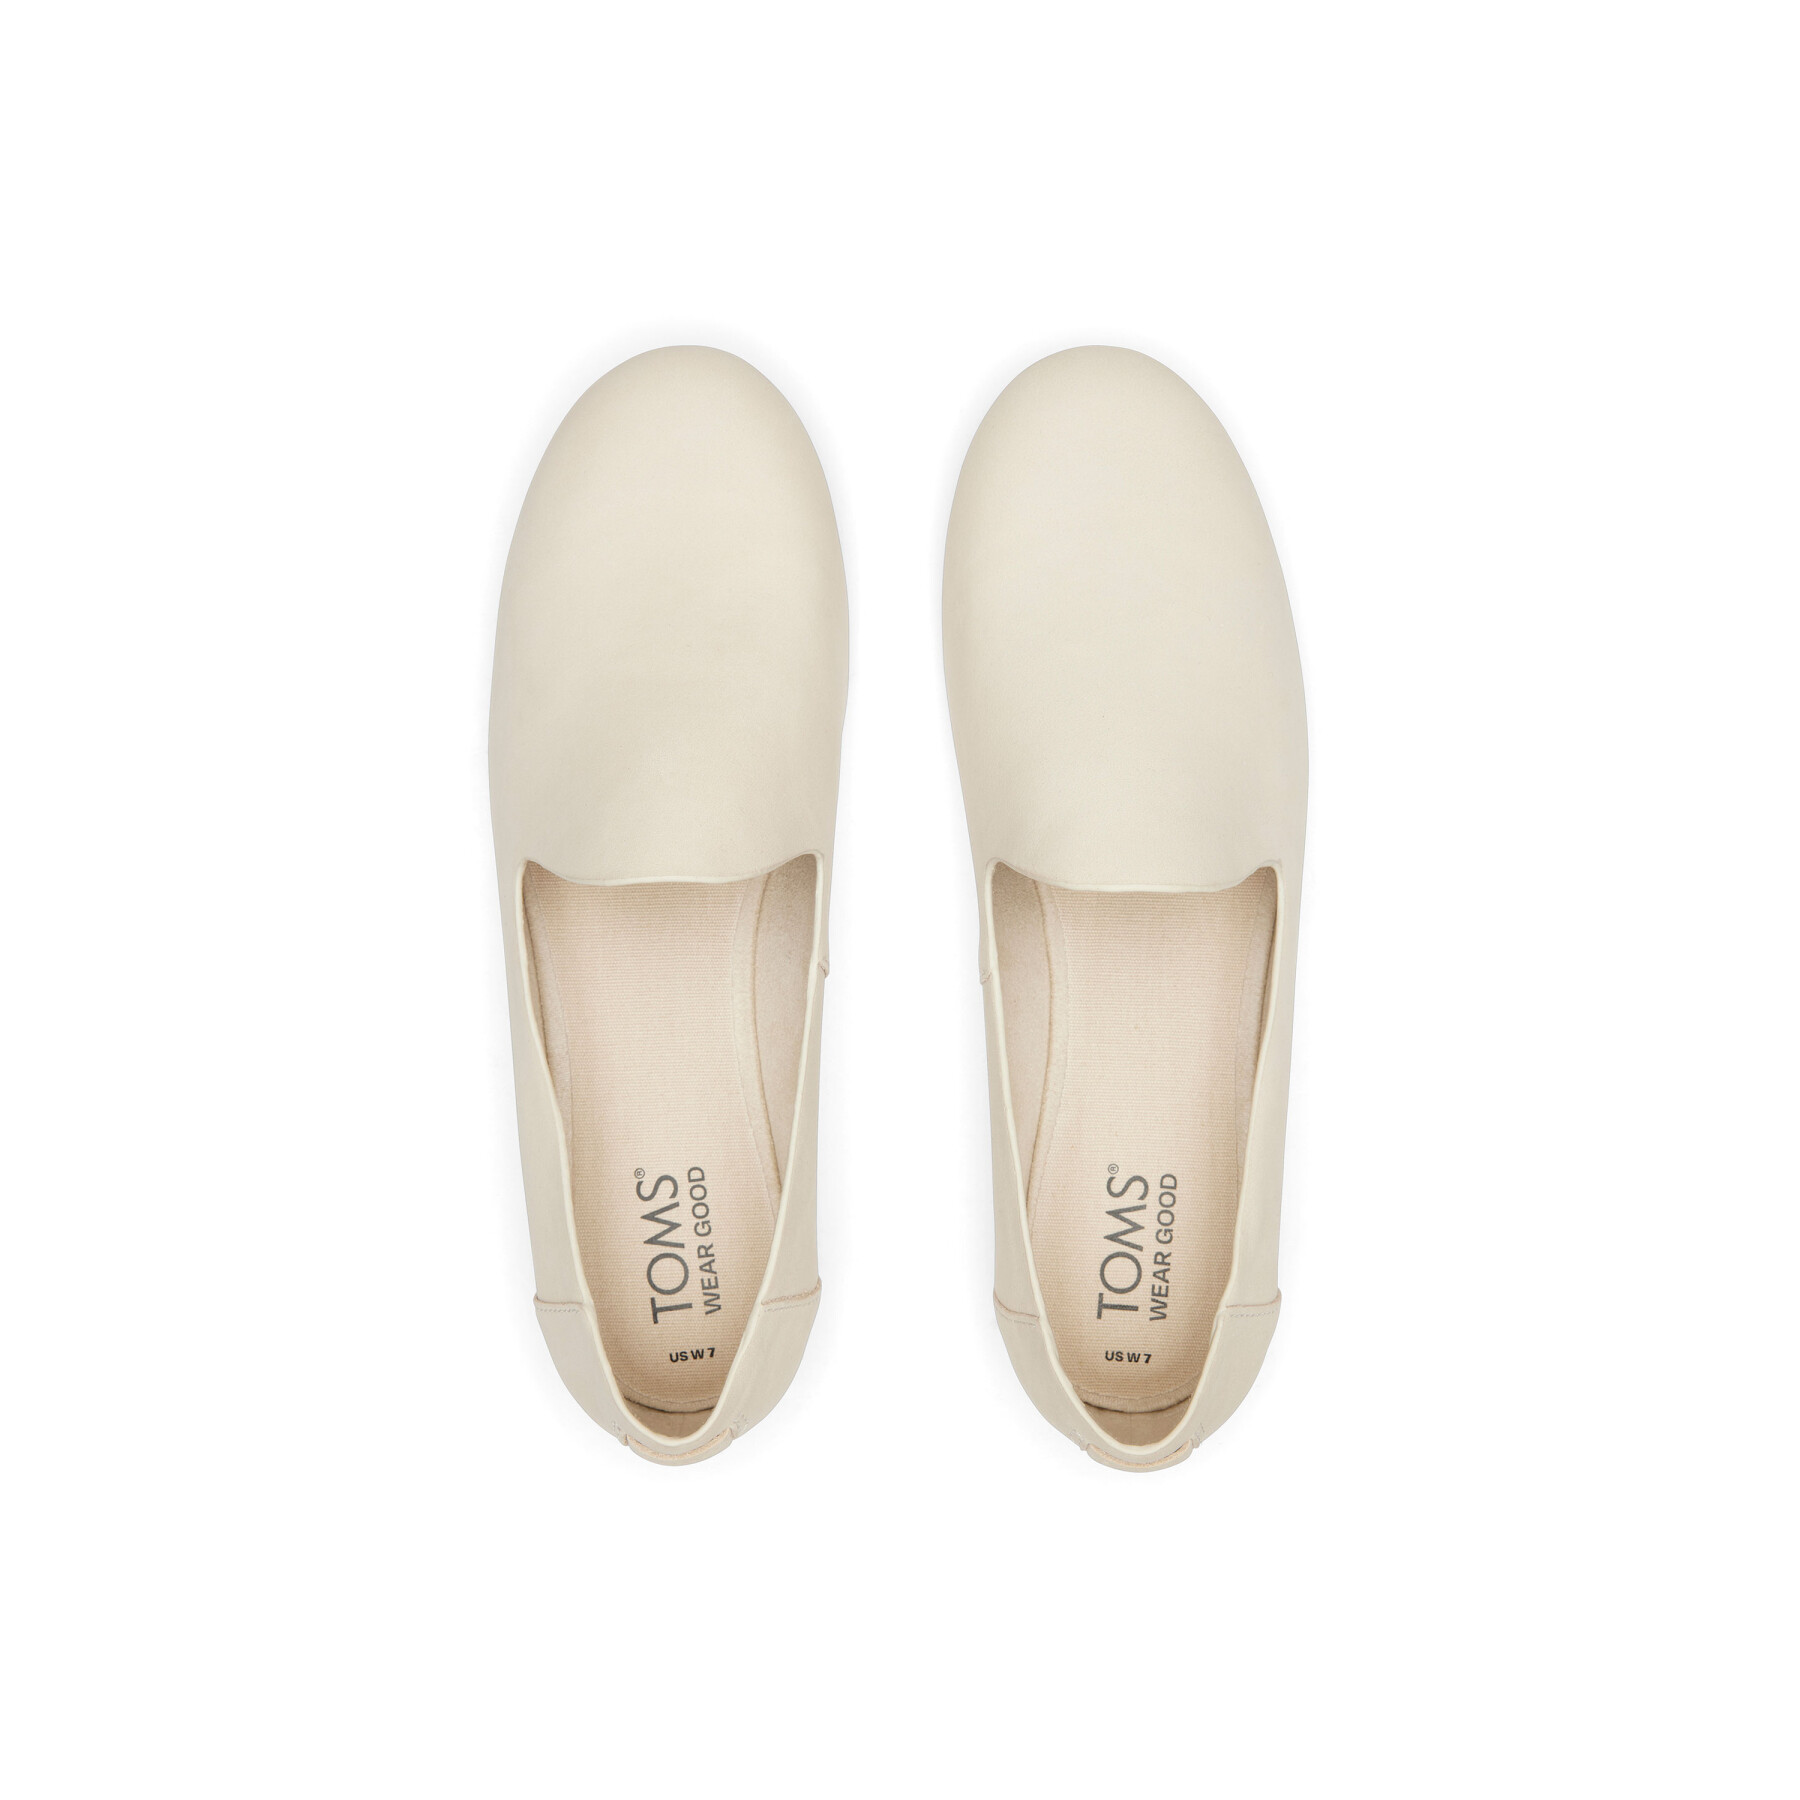 Women's moccasins Toms Darcy